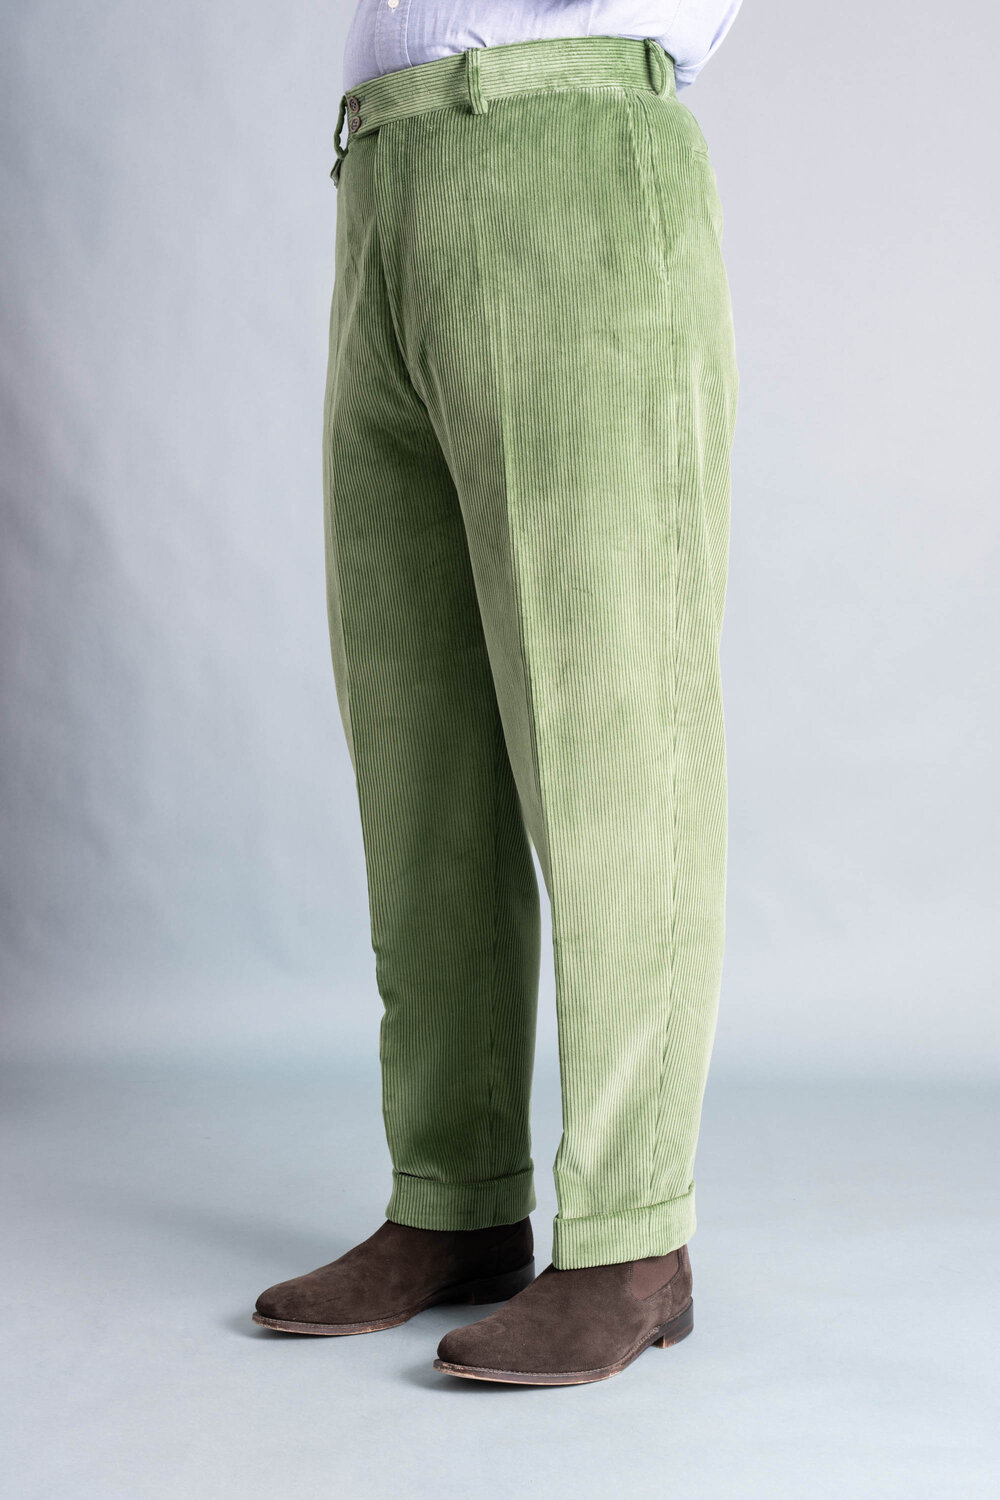 Sage Corduroy Trousers - Stancliffe Flat-Front in 8-Wale Cotton